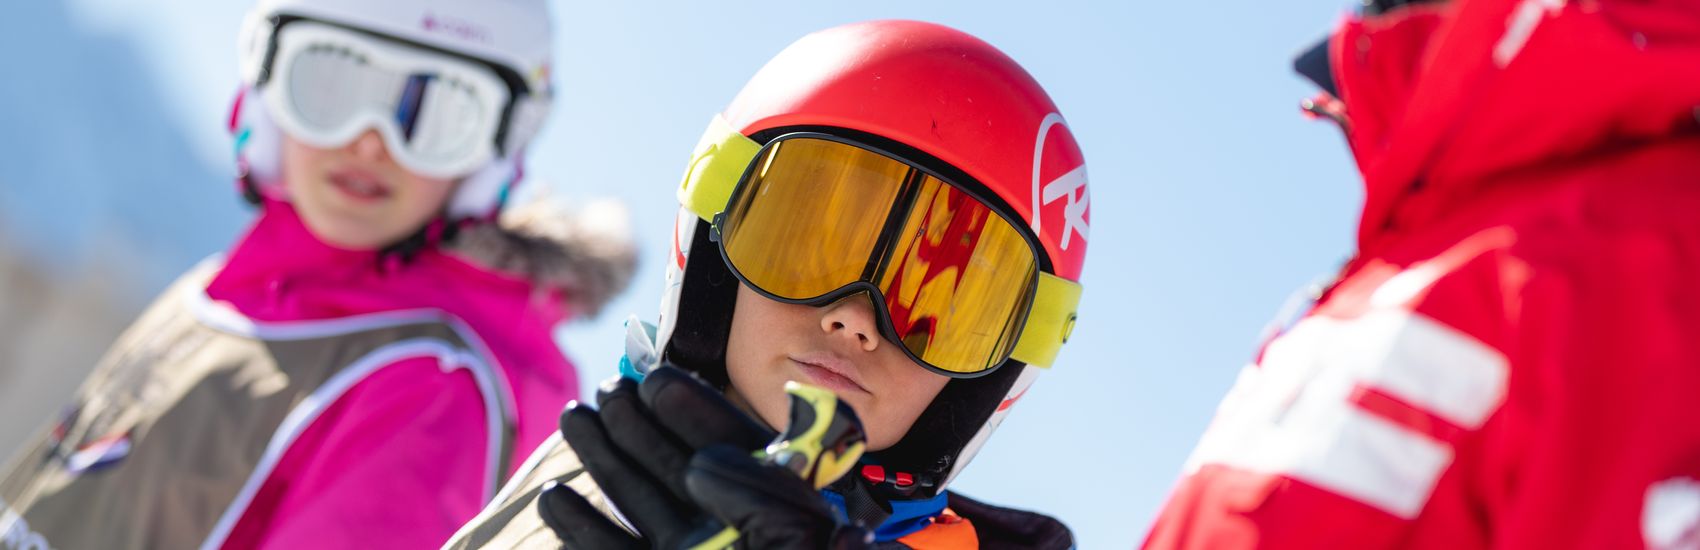 Children Ages 6 - 12 - esf Chamrousse